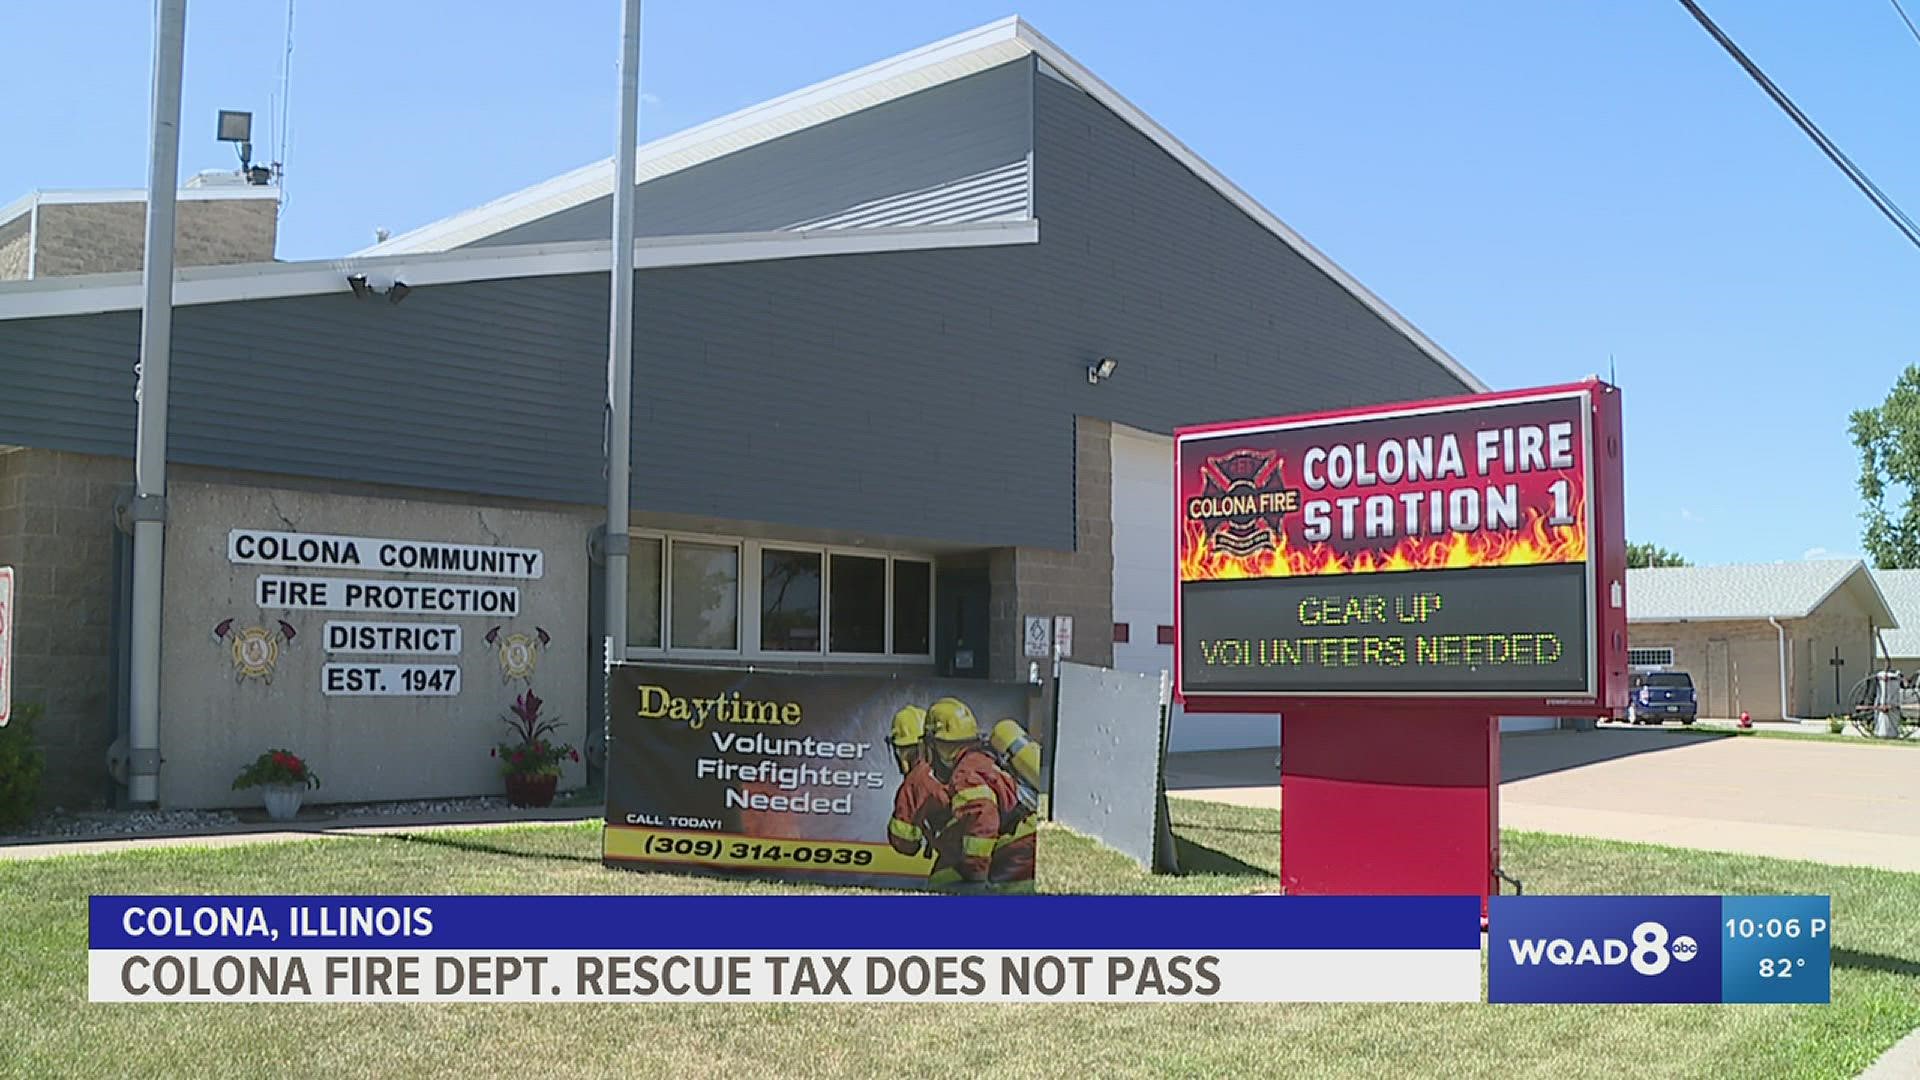 The volunteer fire department is facing staffing issues and wanted to use the tax to hire two full-time, paid firefighters to work during the day.